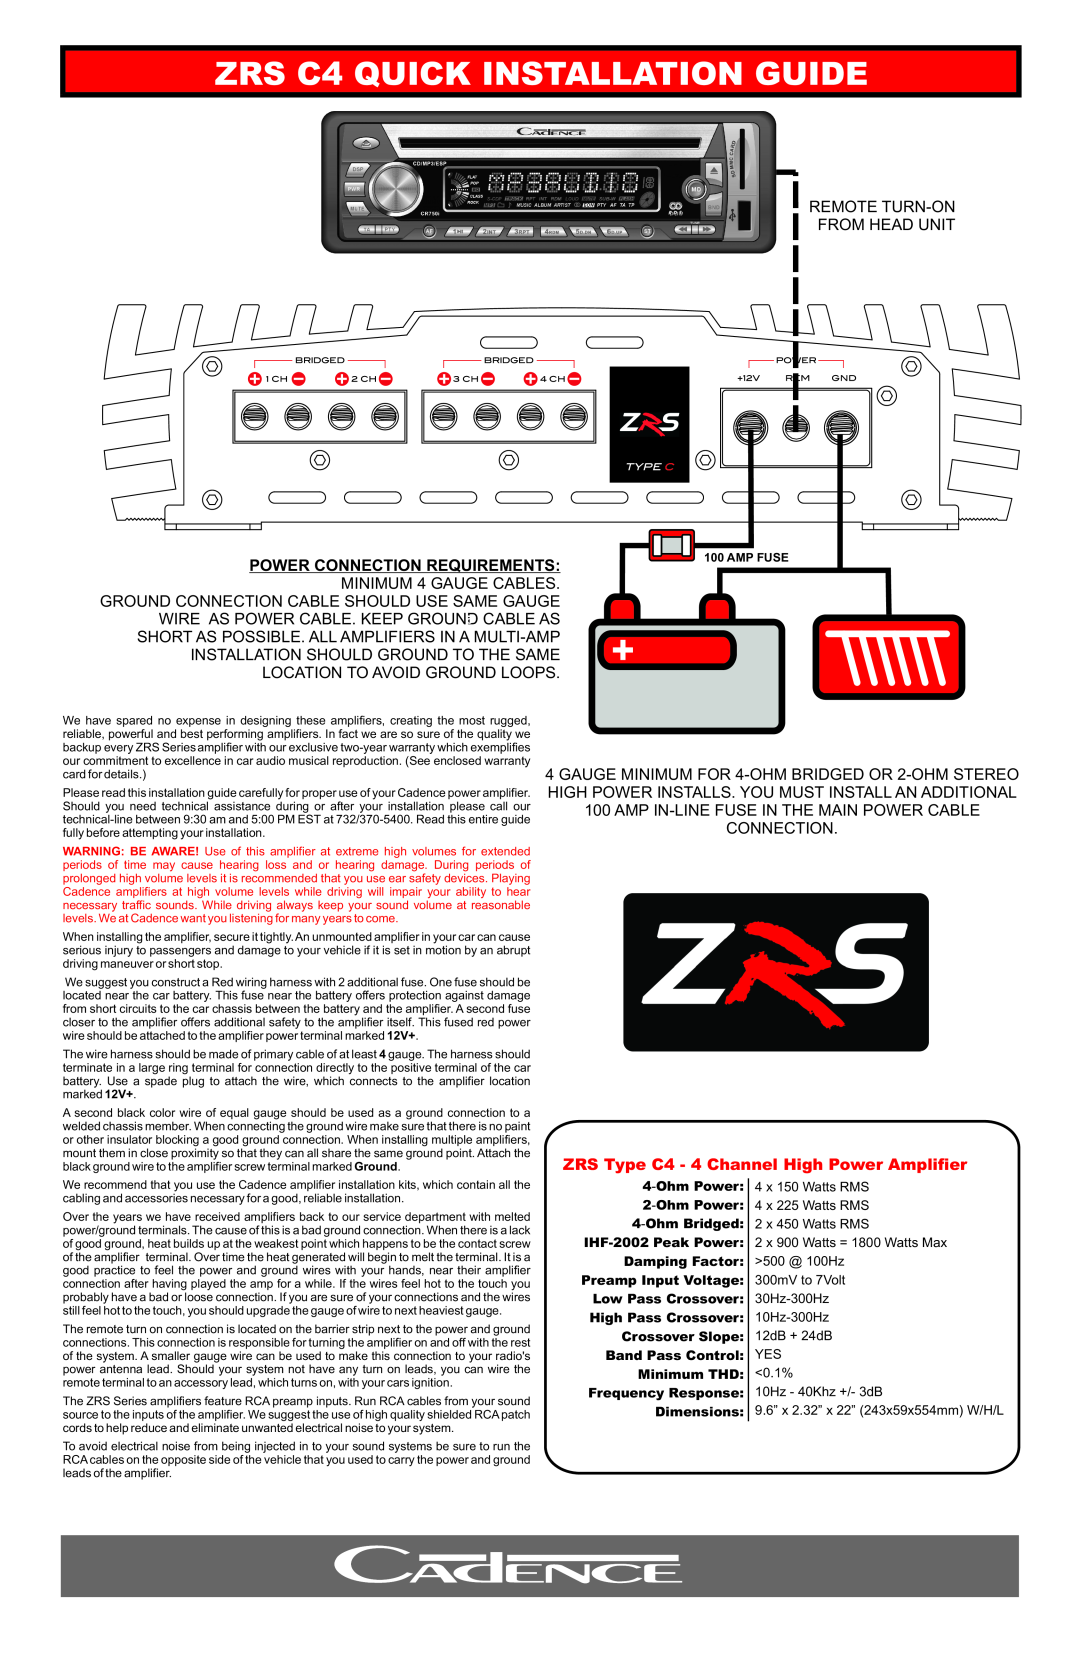 Cadence warranty ZRS C4 QUICK INSTALLATION GUIDE, ZRS Type C4 - 4 Channel High Power Amplifier, High Pass Crossover 